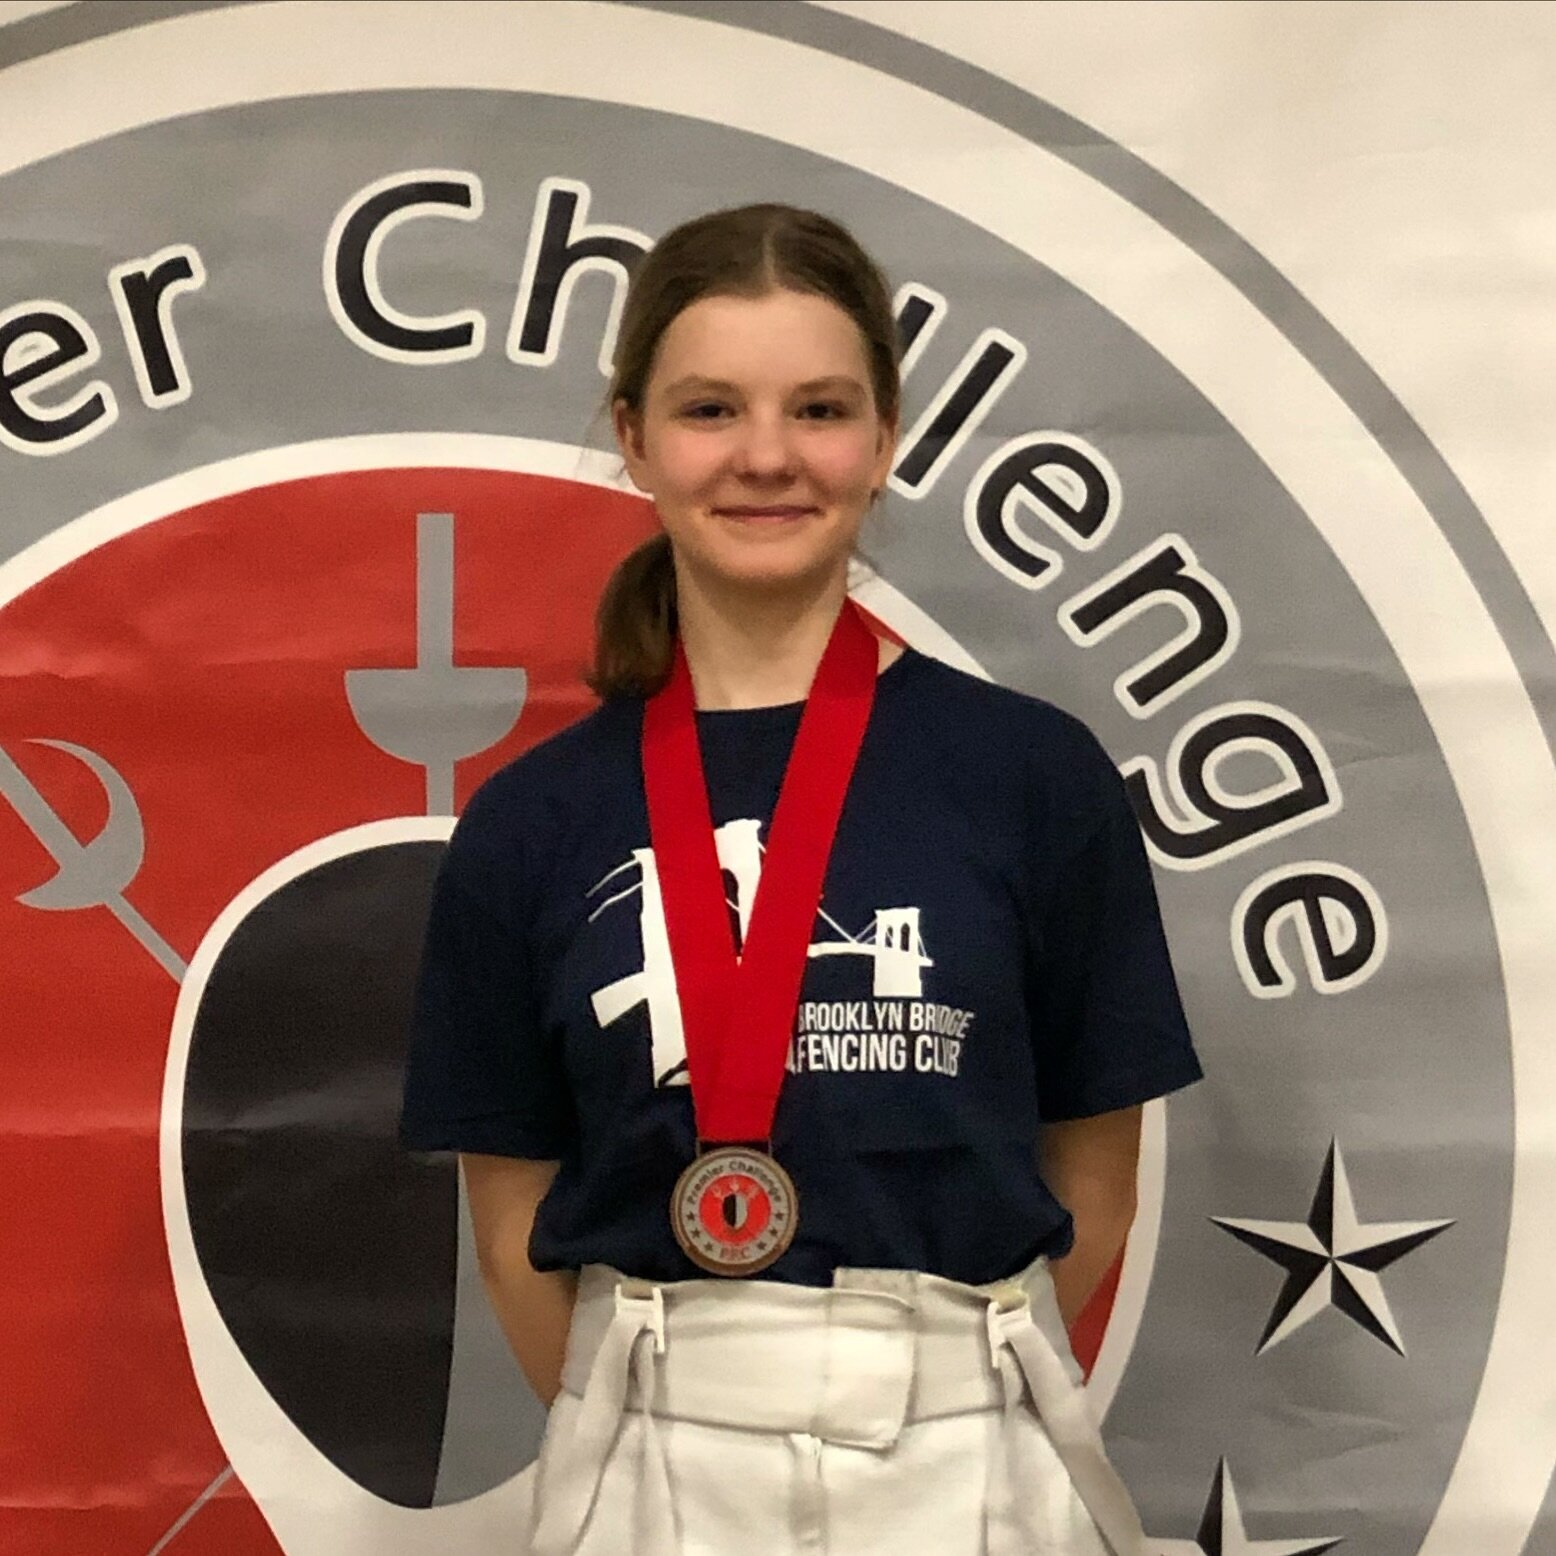 Congratulations to Ana for winning the bronze medal at the Premier Challenge in Cadet Women&rsquo;s Foil! Your hard work was reflected in a fantastic performance. We&rsquo;re so proud of your achievement! Keep fighting! 🥉🤺 

#fencing #foil #cadet #